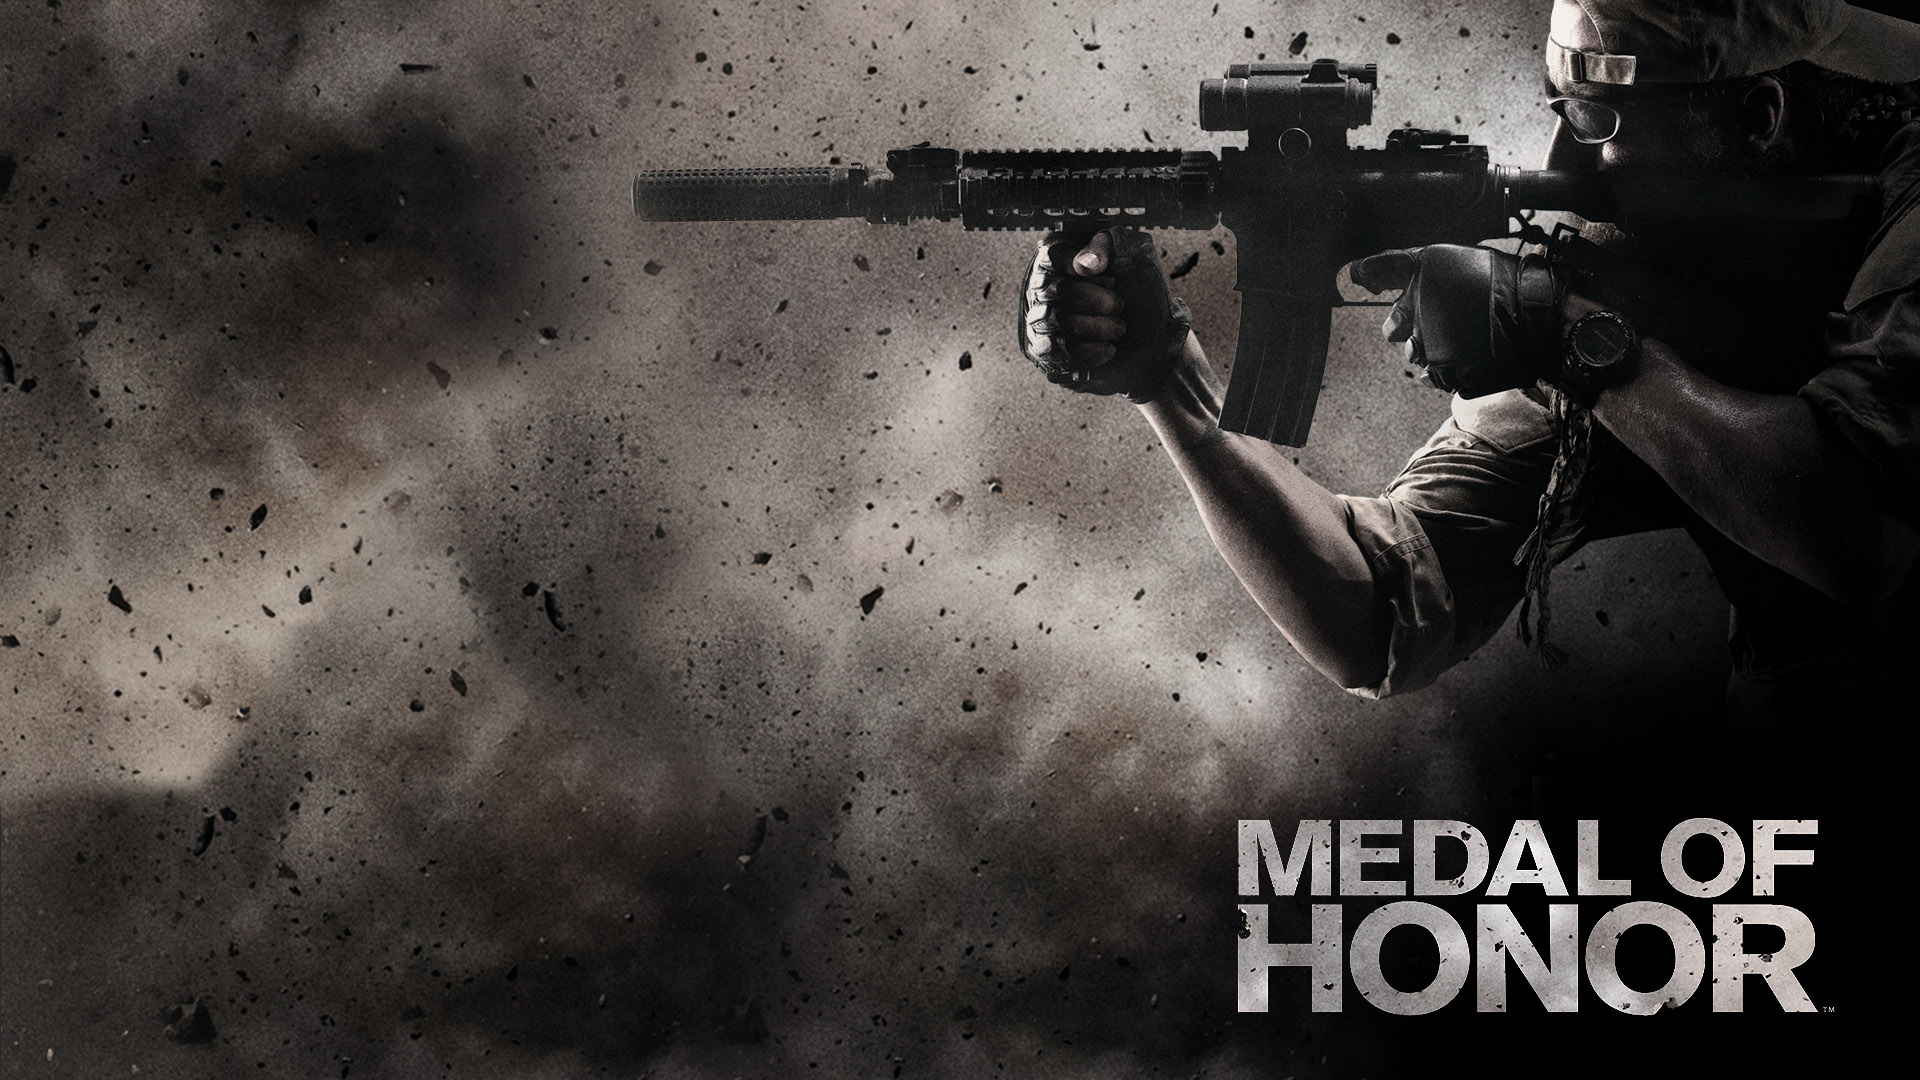 Moh Medal Of Honor HD Image Games